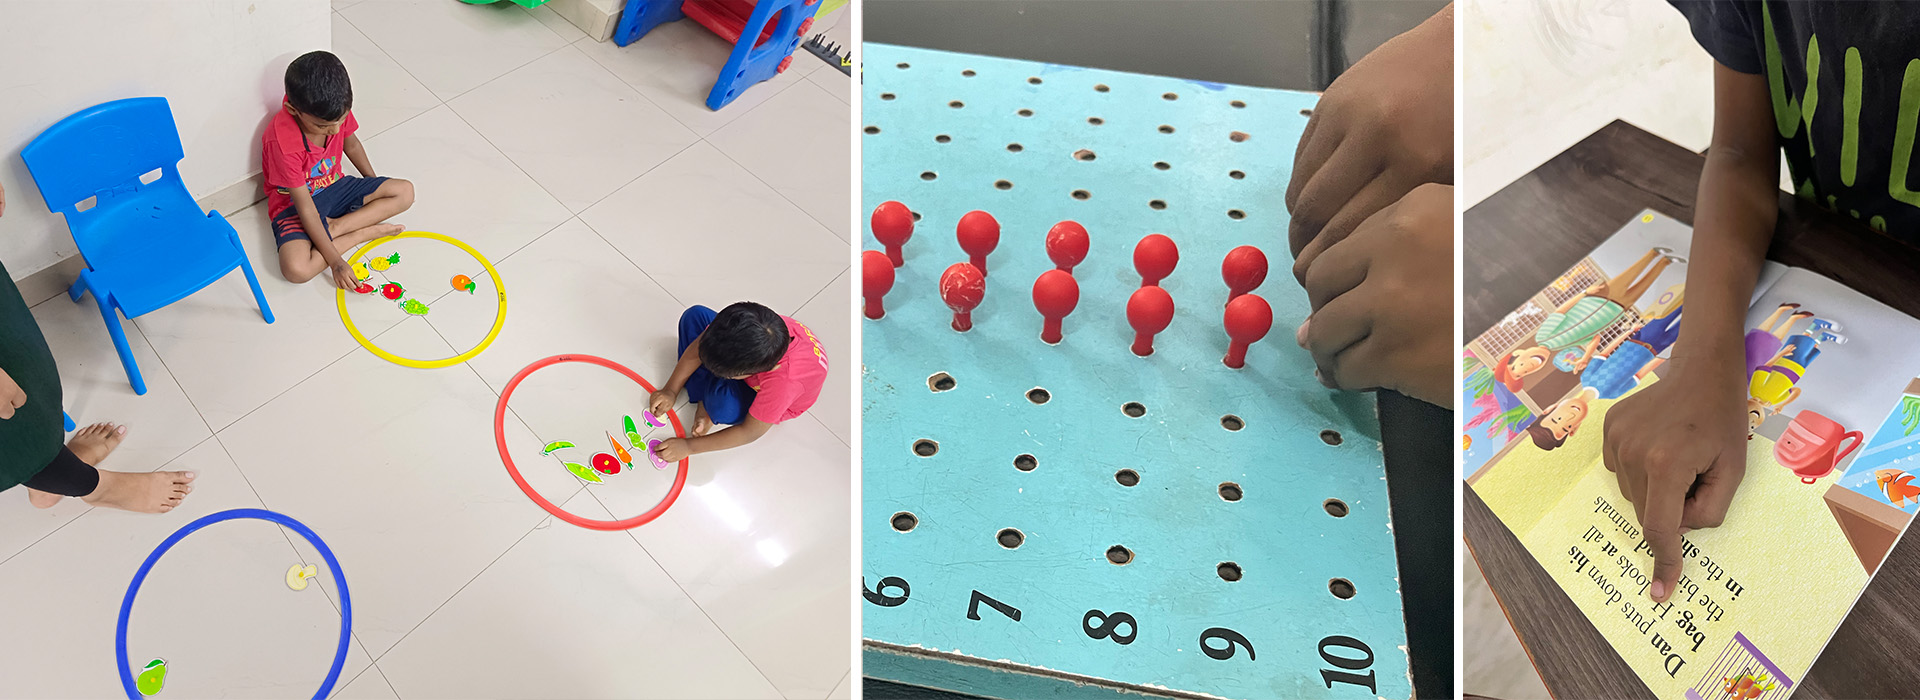 Engaged in therapeutic activities, children with special abilities explore various games ,while also making efforts in reading.